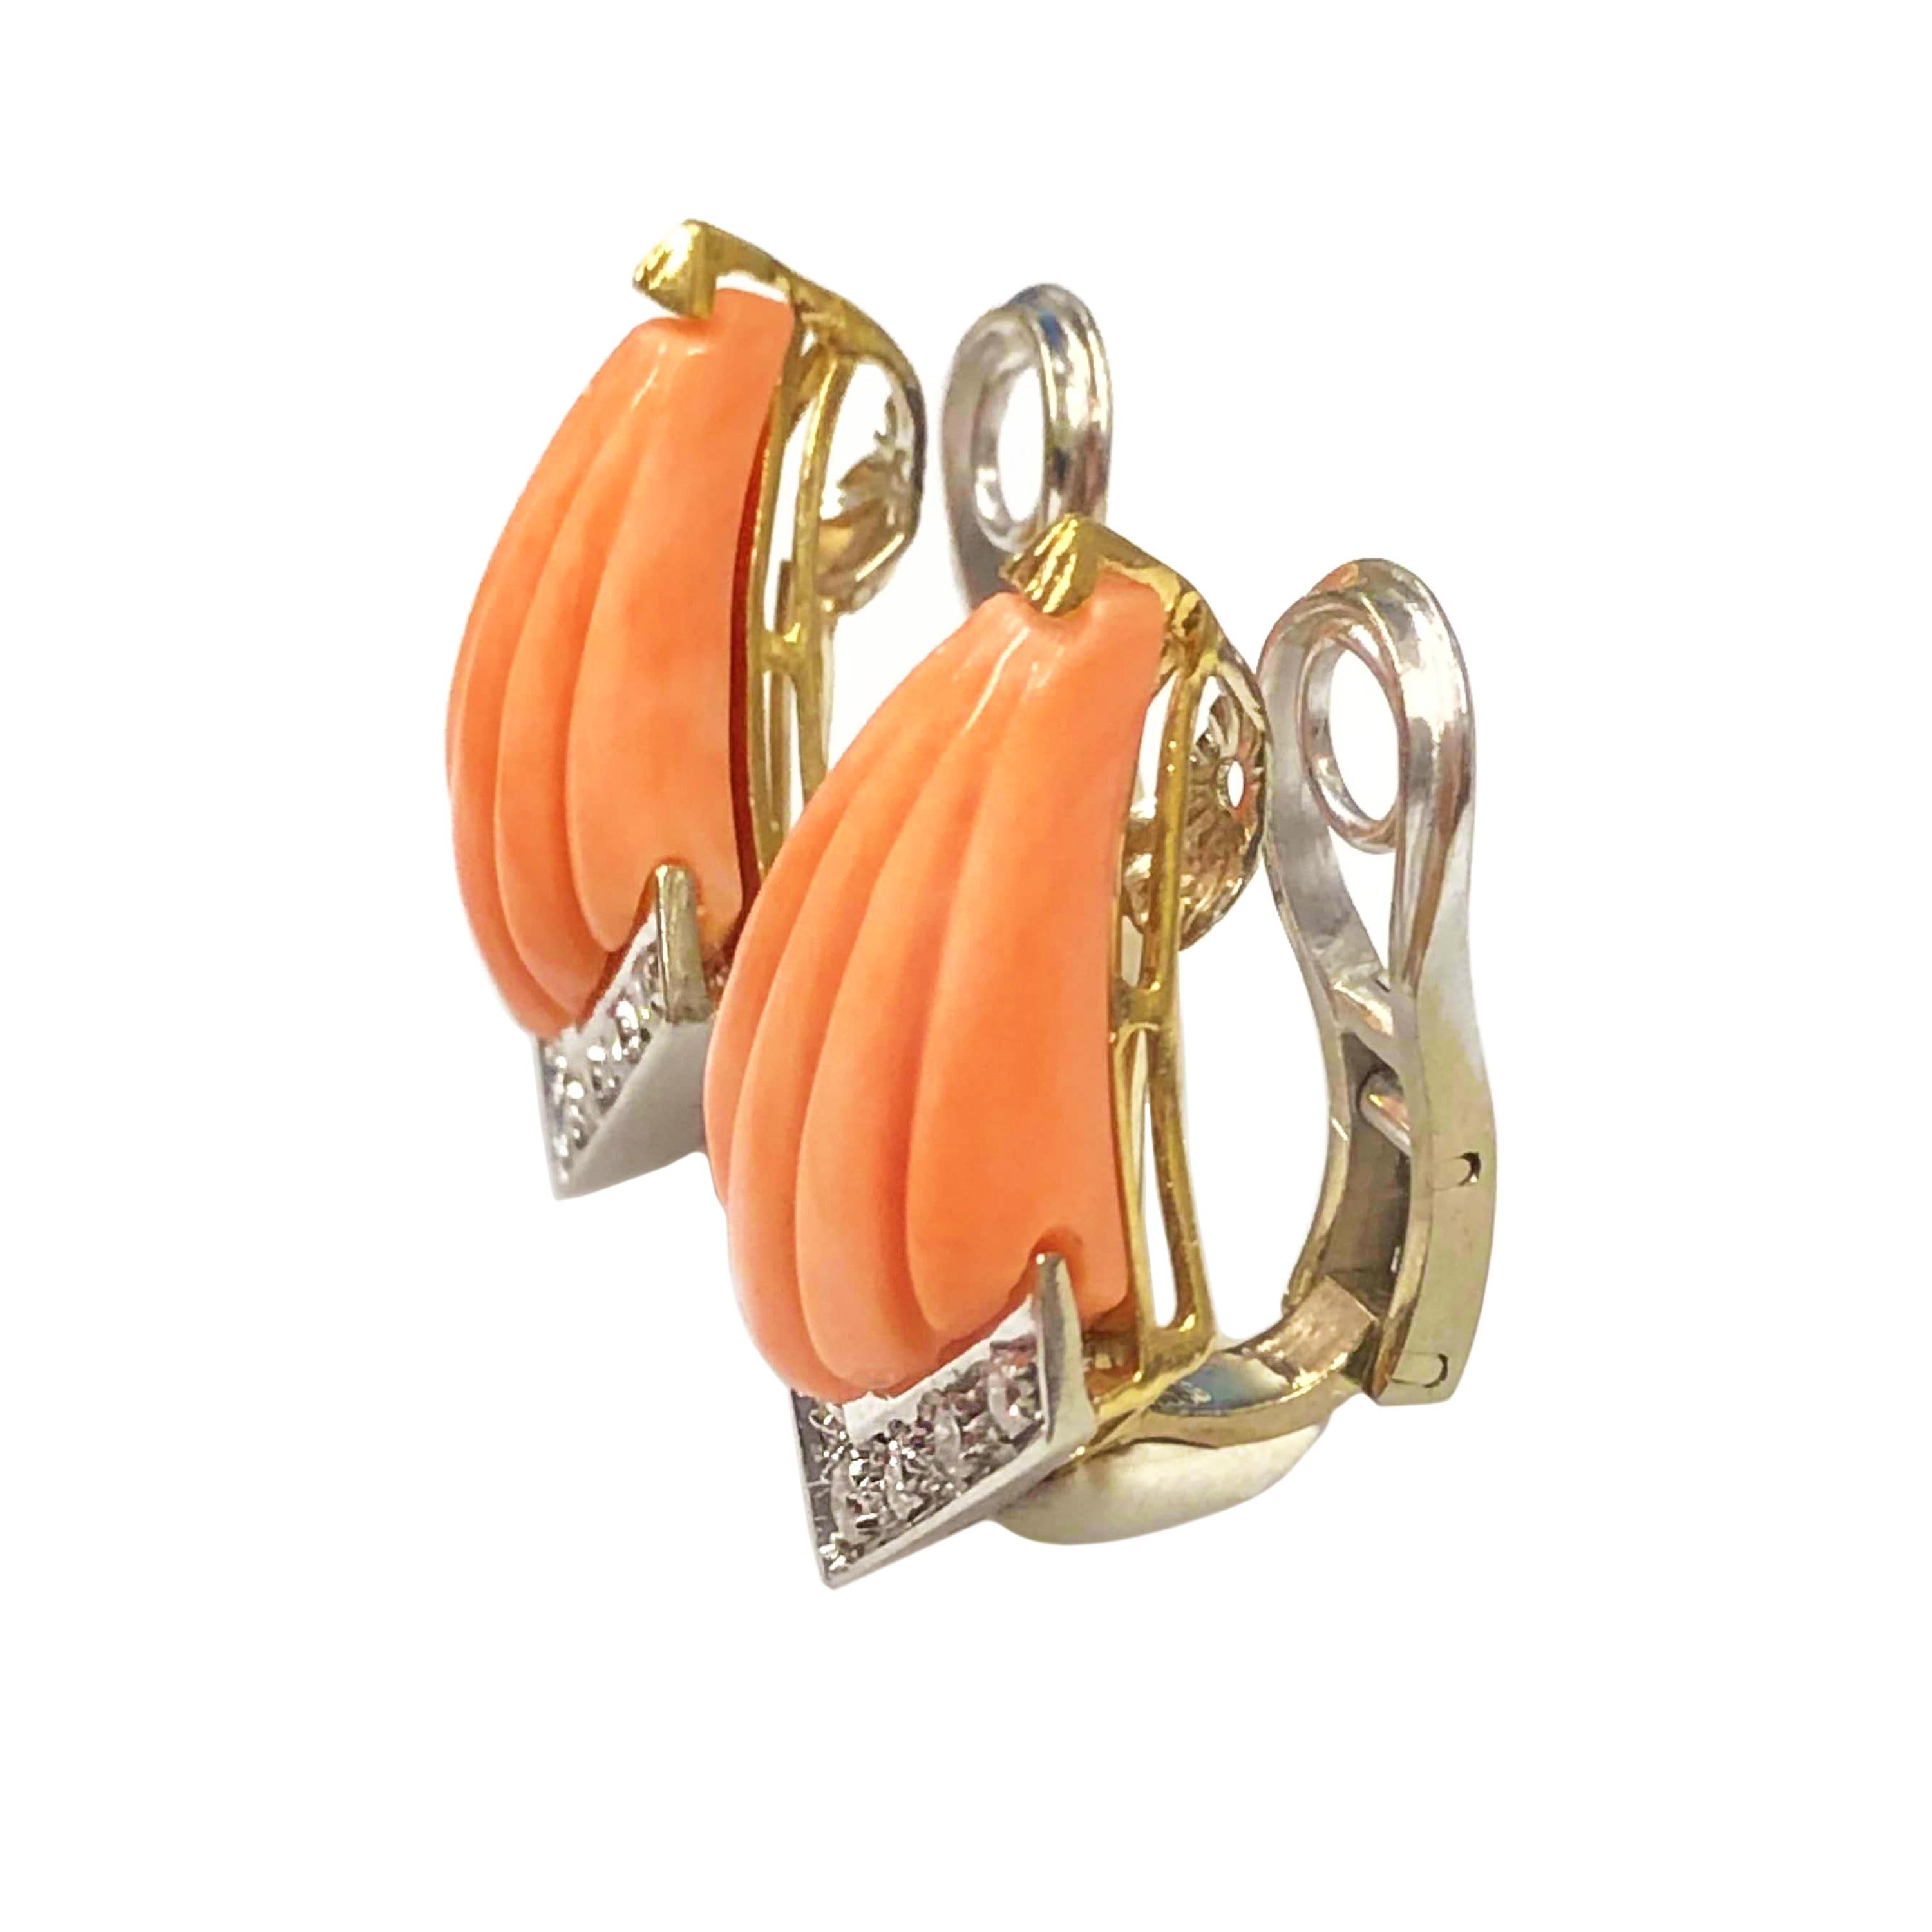 Circa 1970s 18K White and Yellow Gold Earrings, Set with Fan Shaped Scalloped carved Coral and further set with Round Brilliant cut Diamonds totaling 1/2 carat. The earrings measure 1 inch in length X 3/4 inch wide. Clip backs to which a post can be